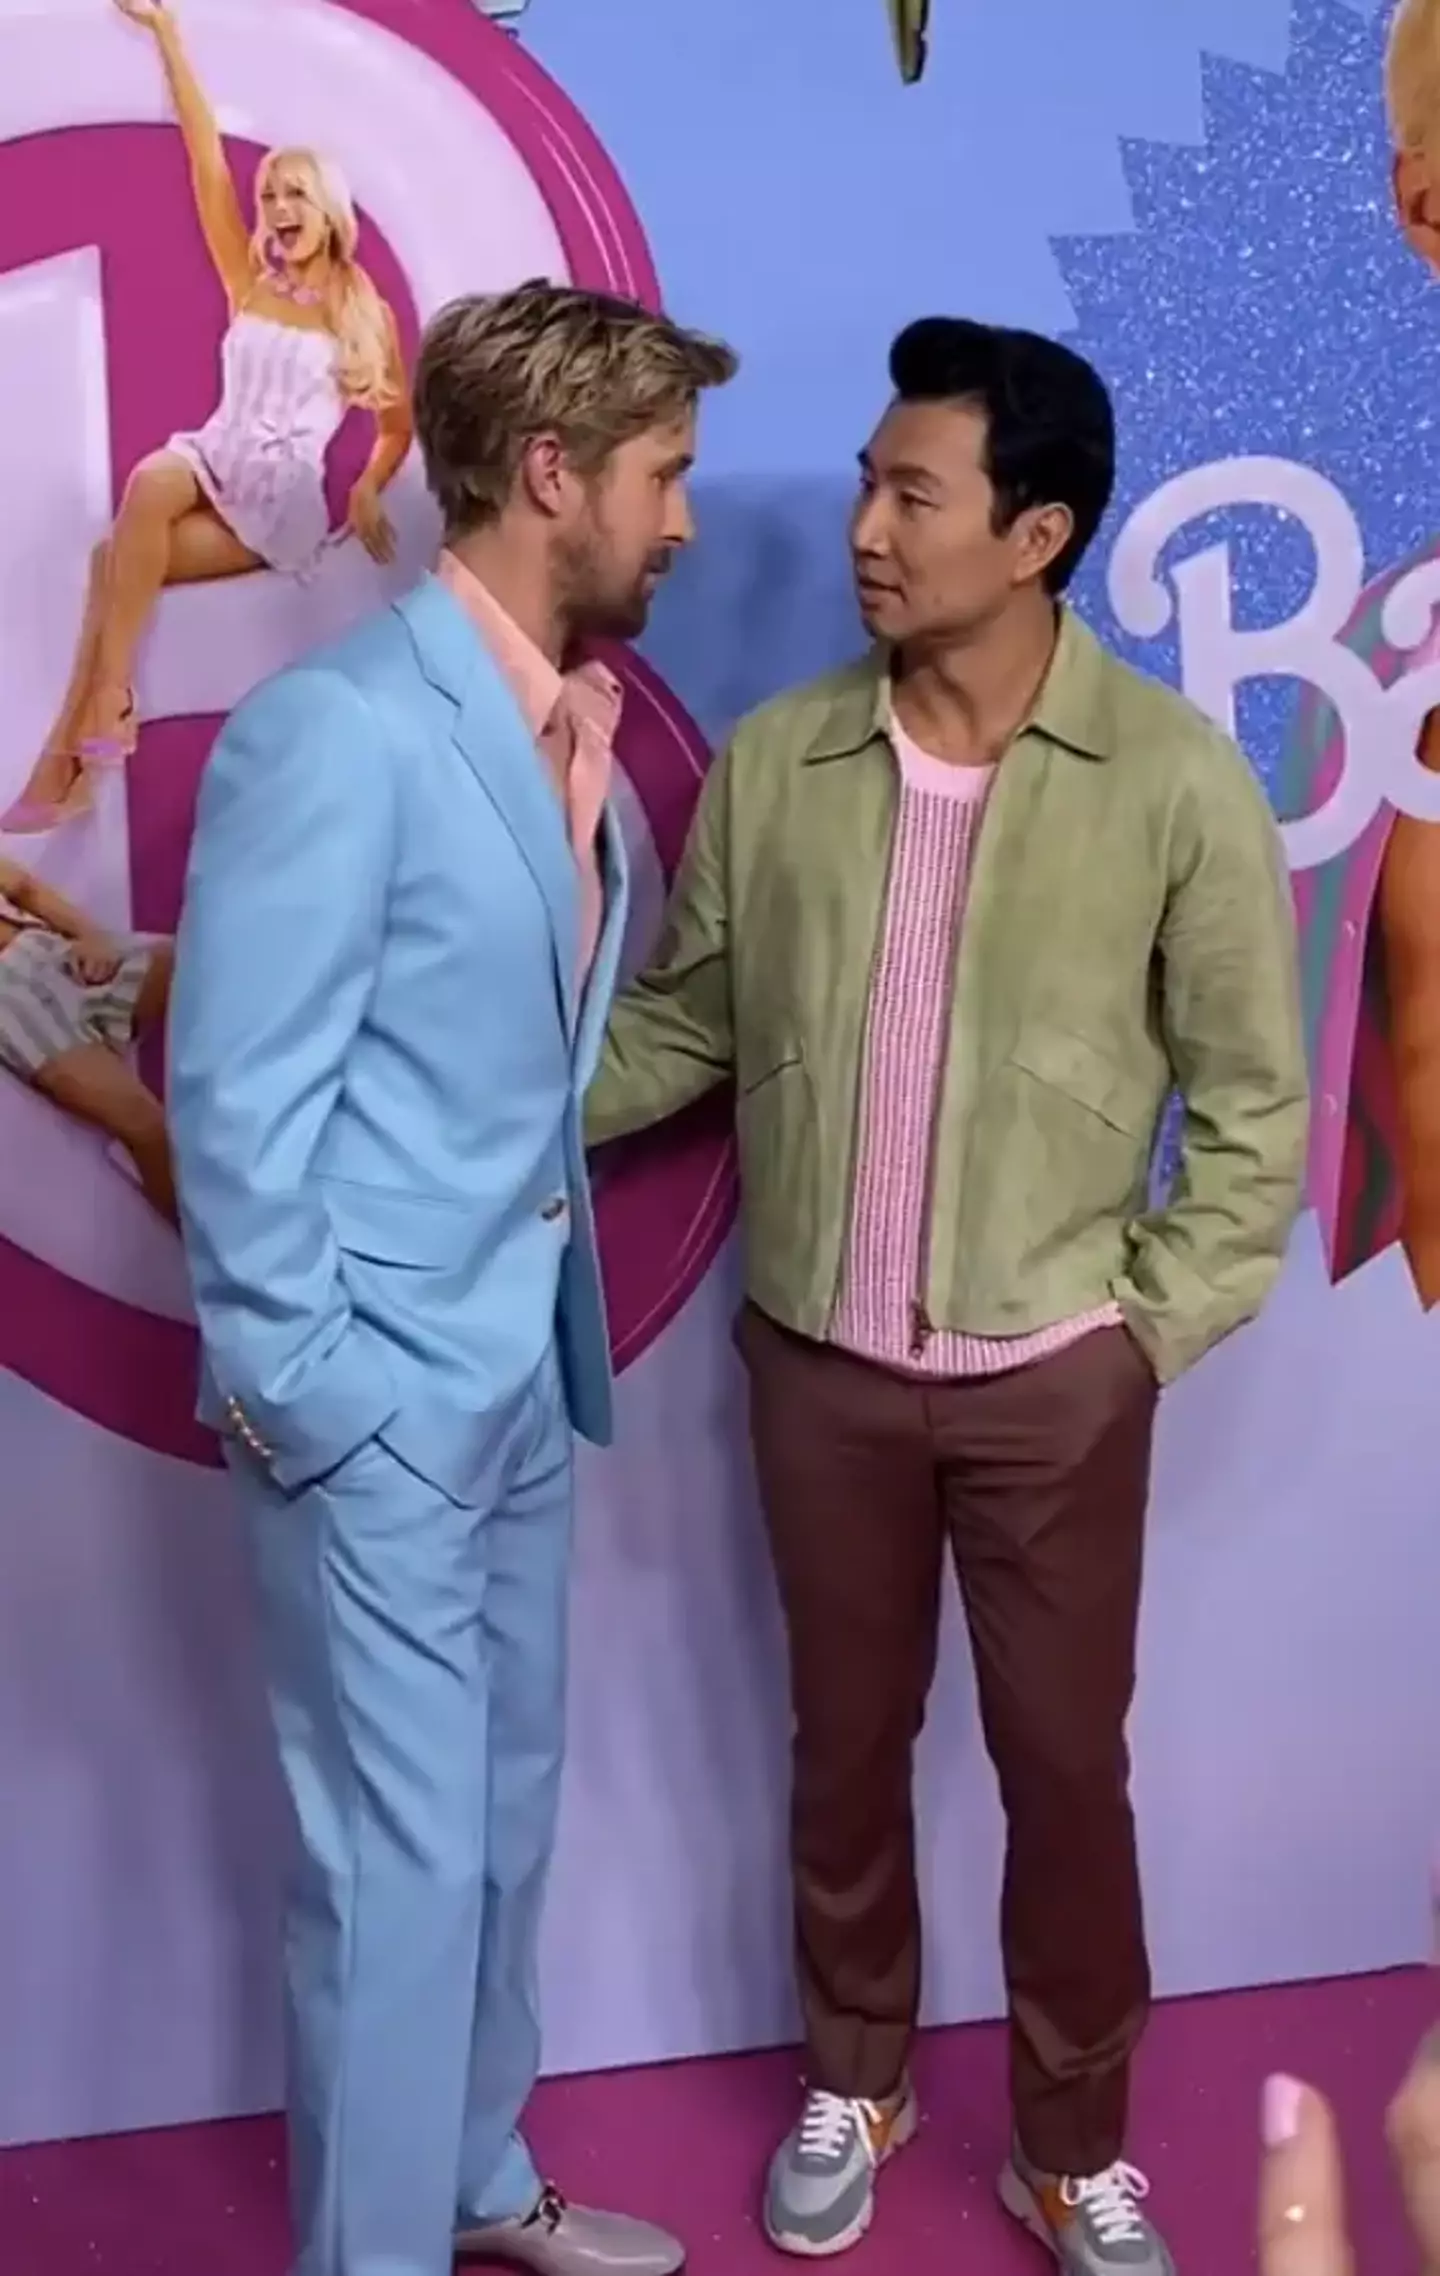 Simu Liu looked a little anxious after the encounter with co-star Ryan Gosling.